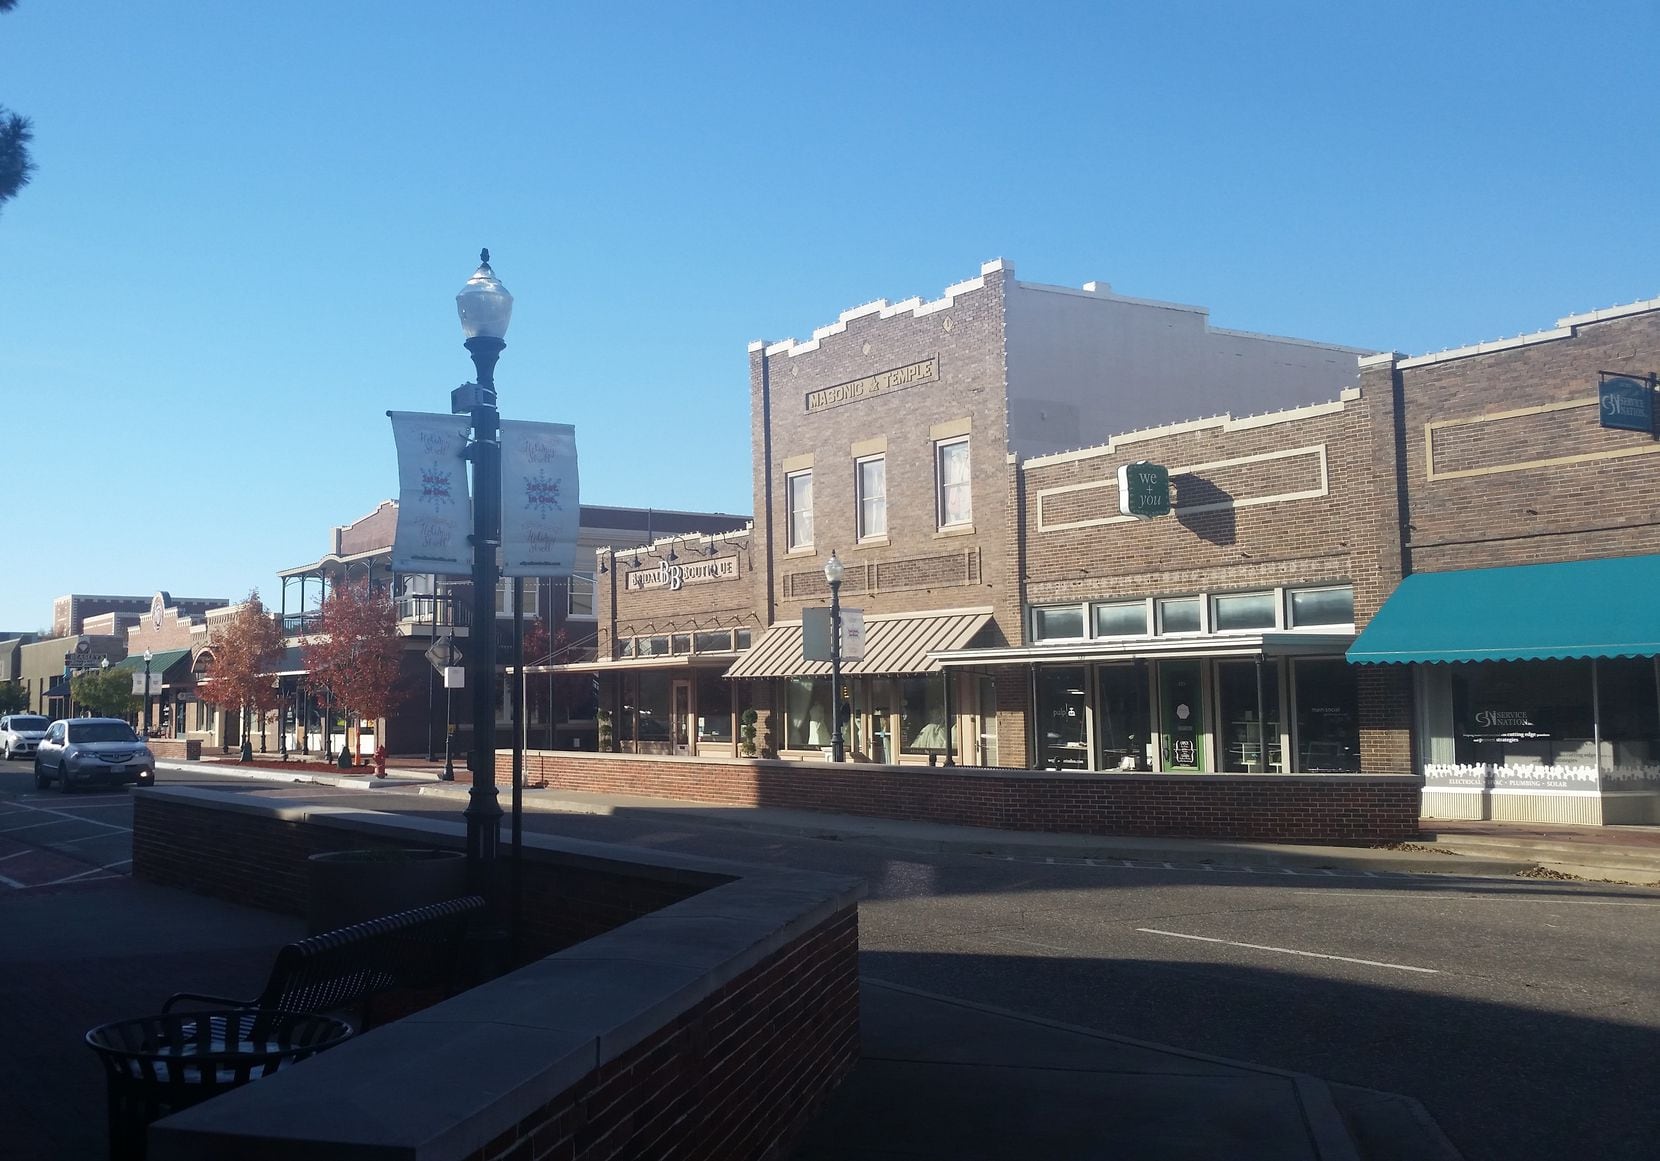 Lewisville's historic Old Town district has buildings dating to the late 1800s.